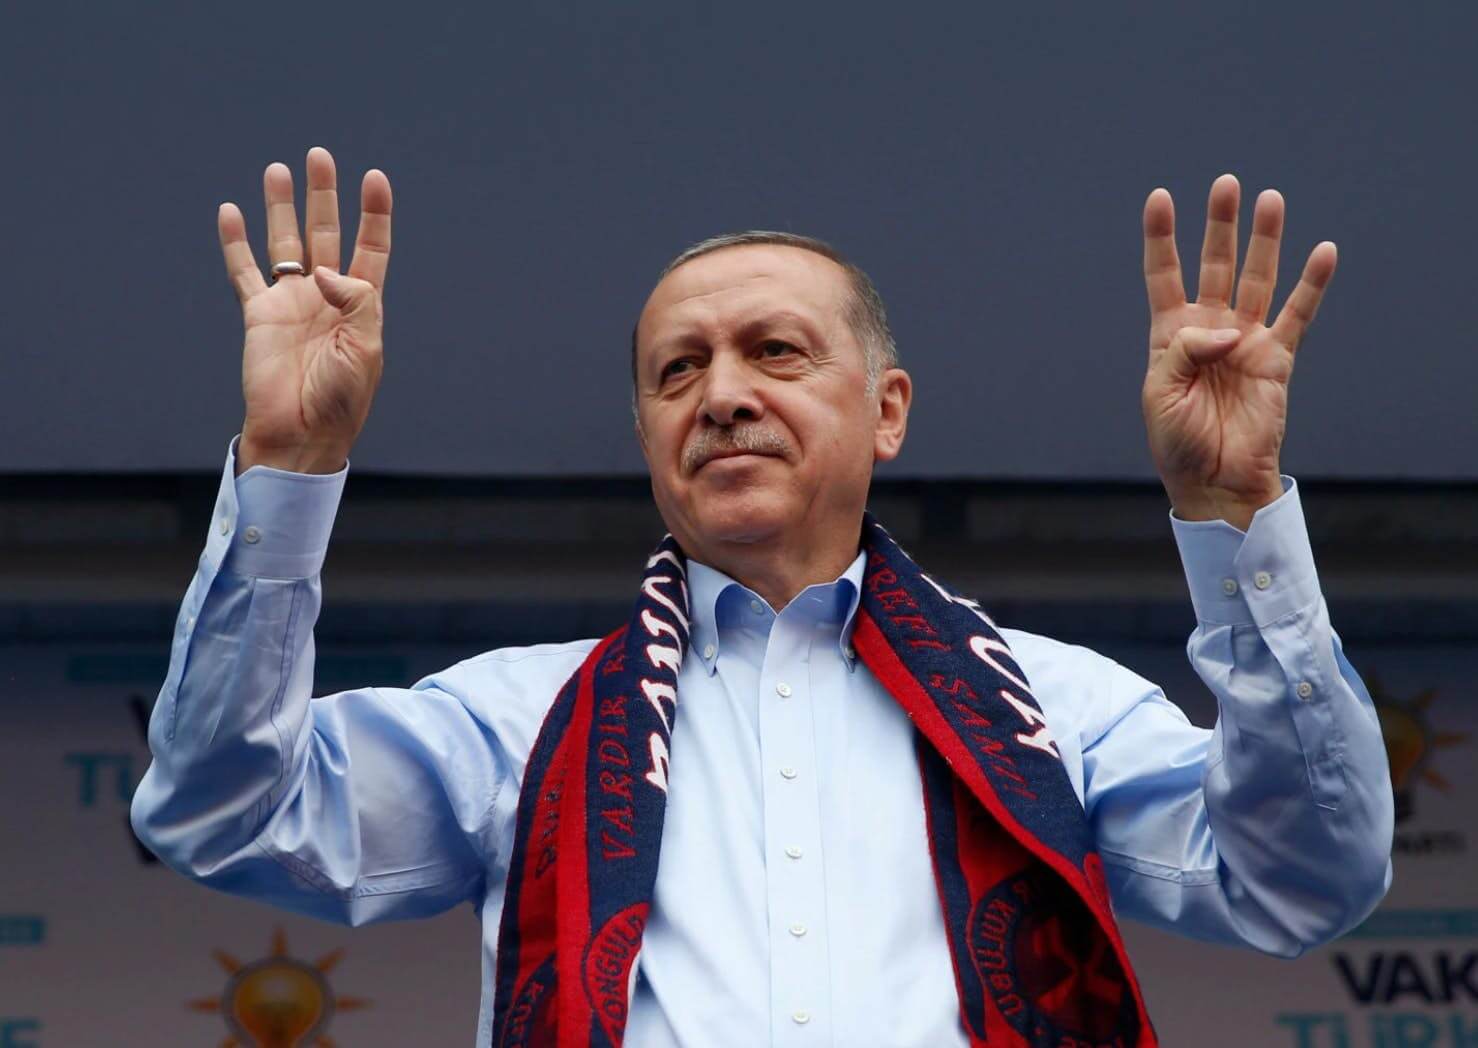 Another win for Erdogan is no longer a foregone conclusion